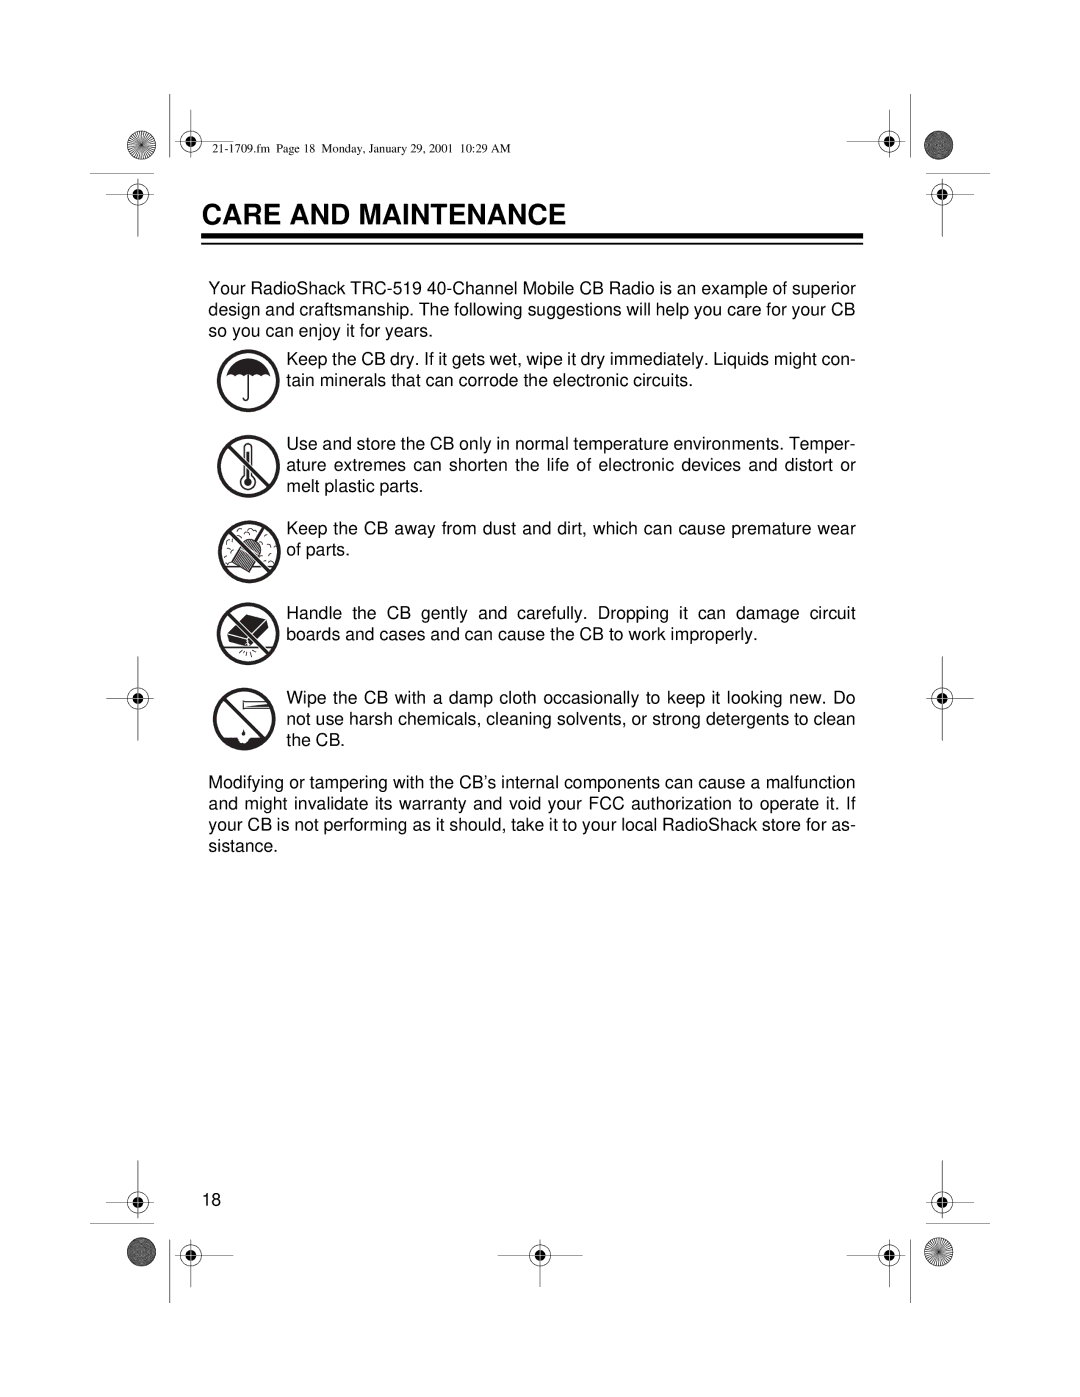 Radio Shack TRC-519 owner manual Care and Maintenance 